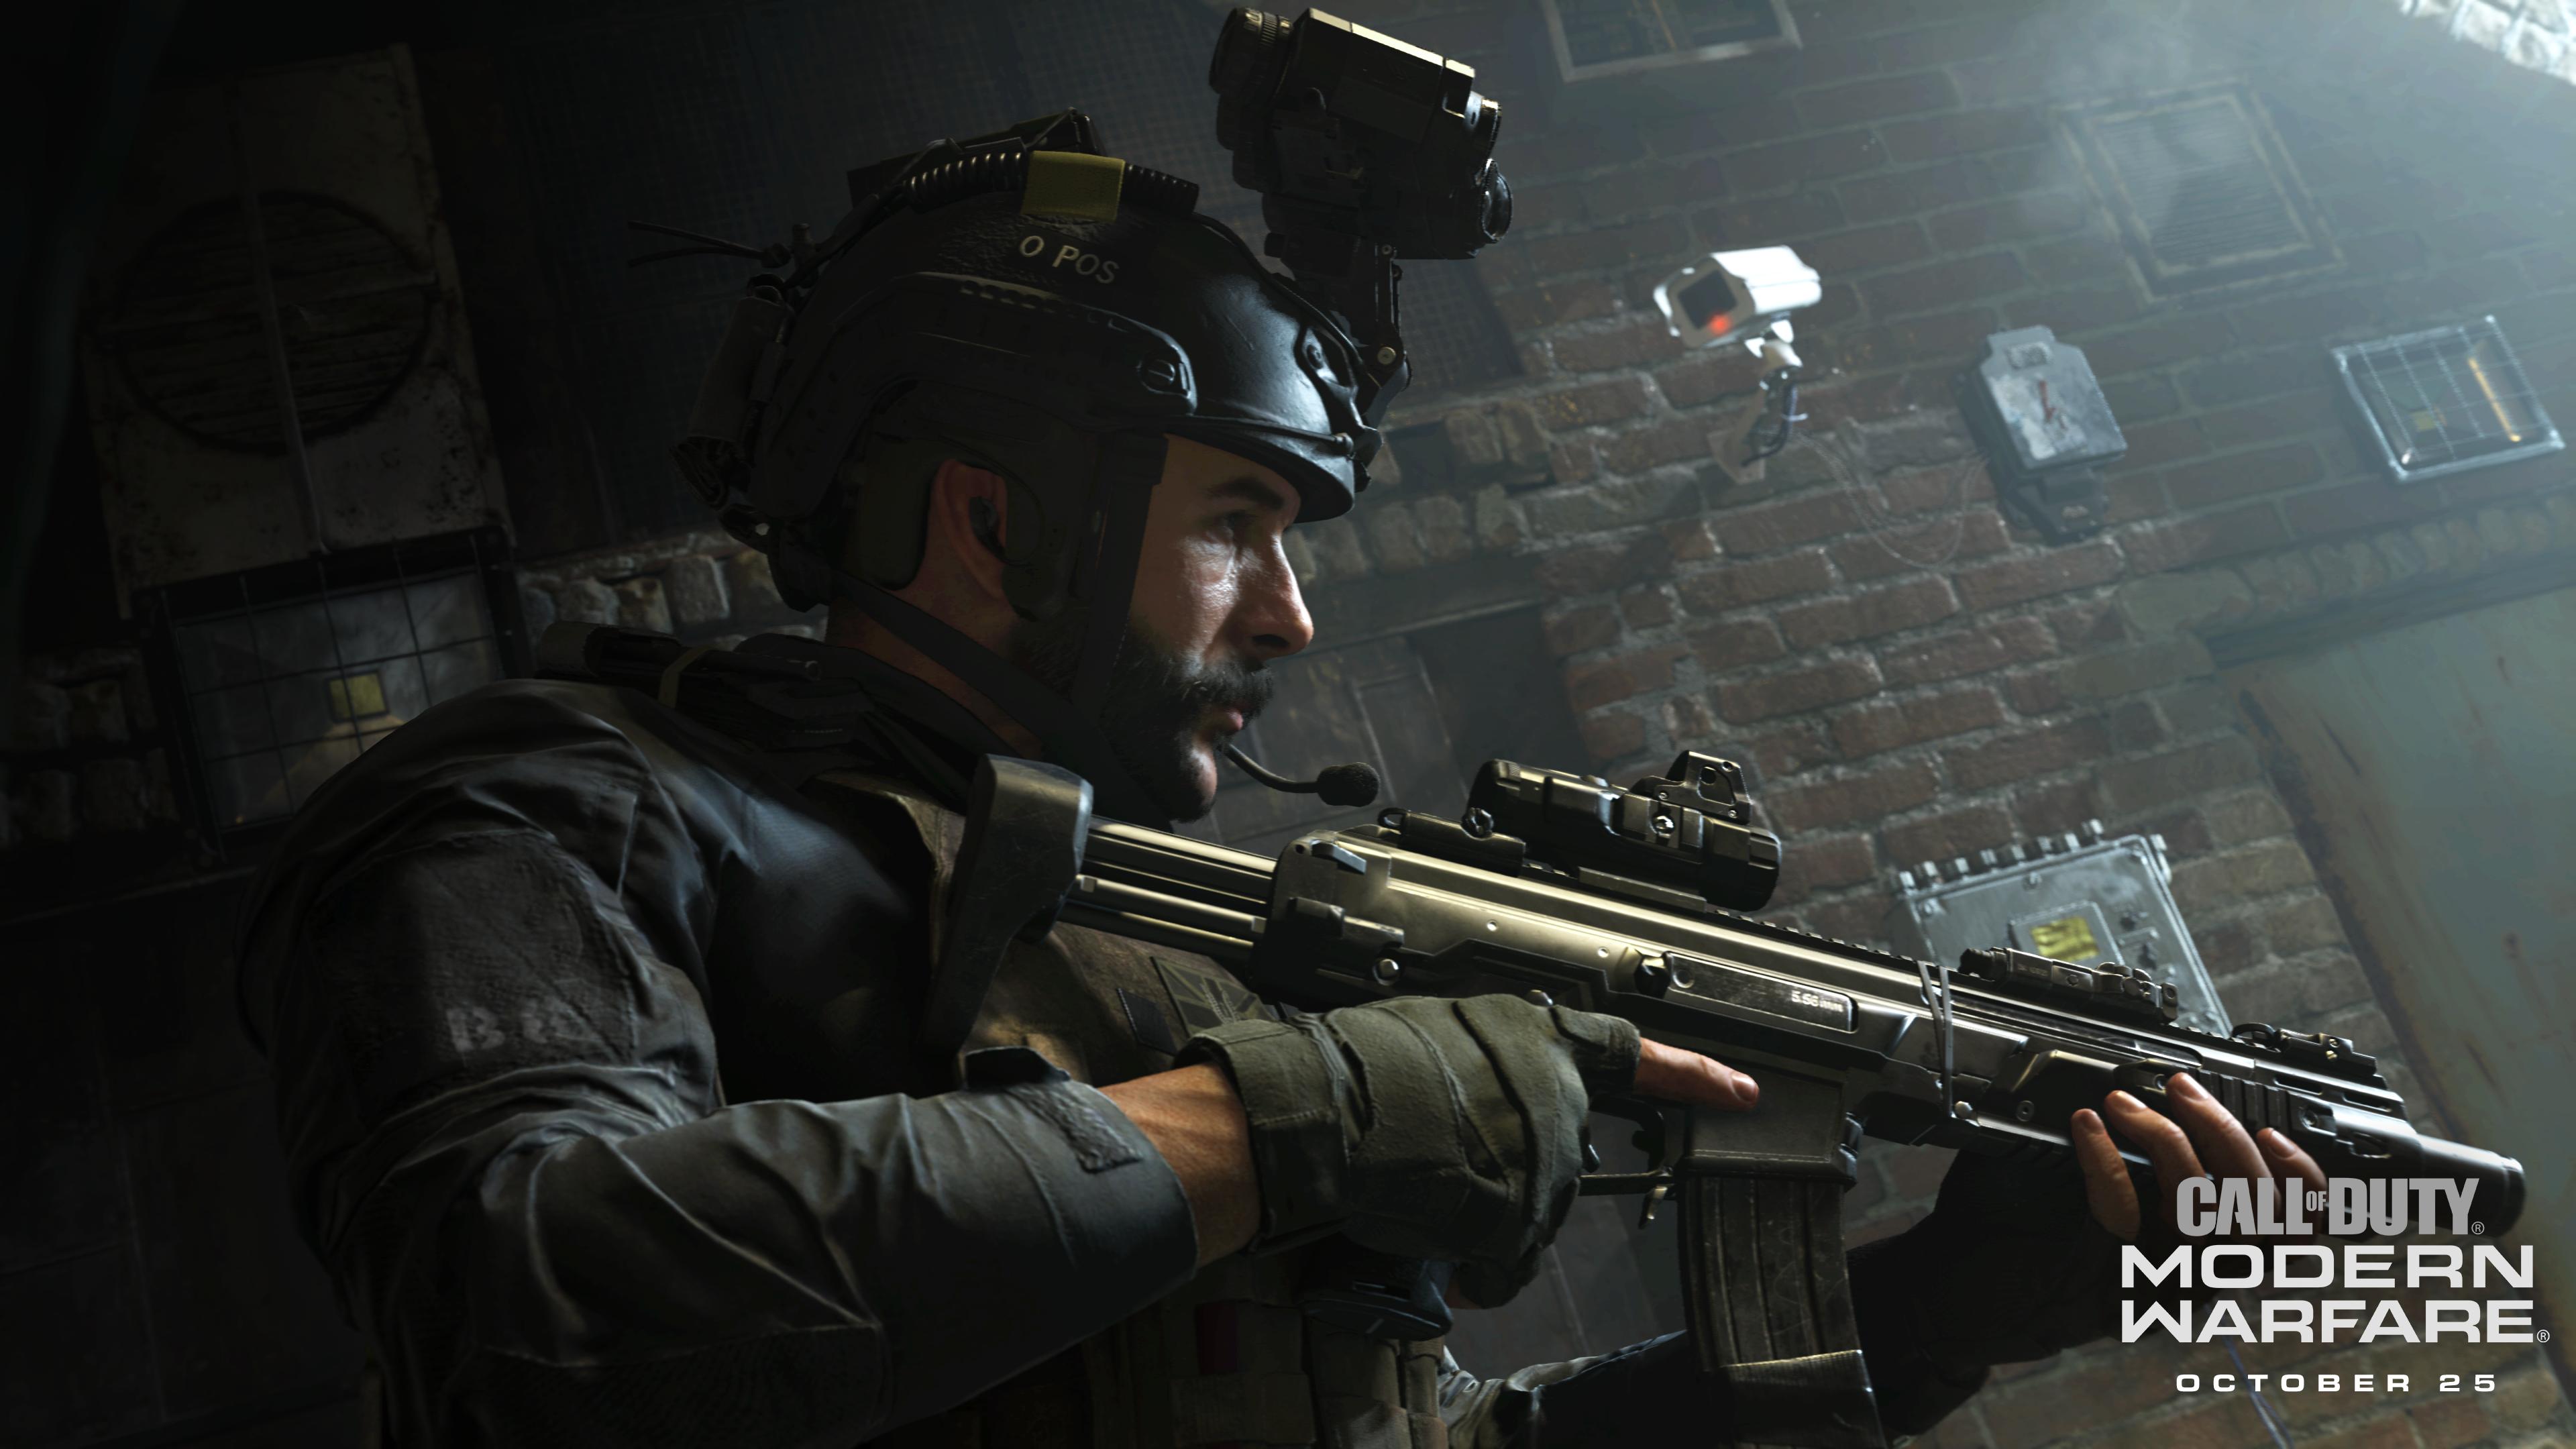 Review: Modern Warfare is the freshest CoD in years | VGC - 